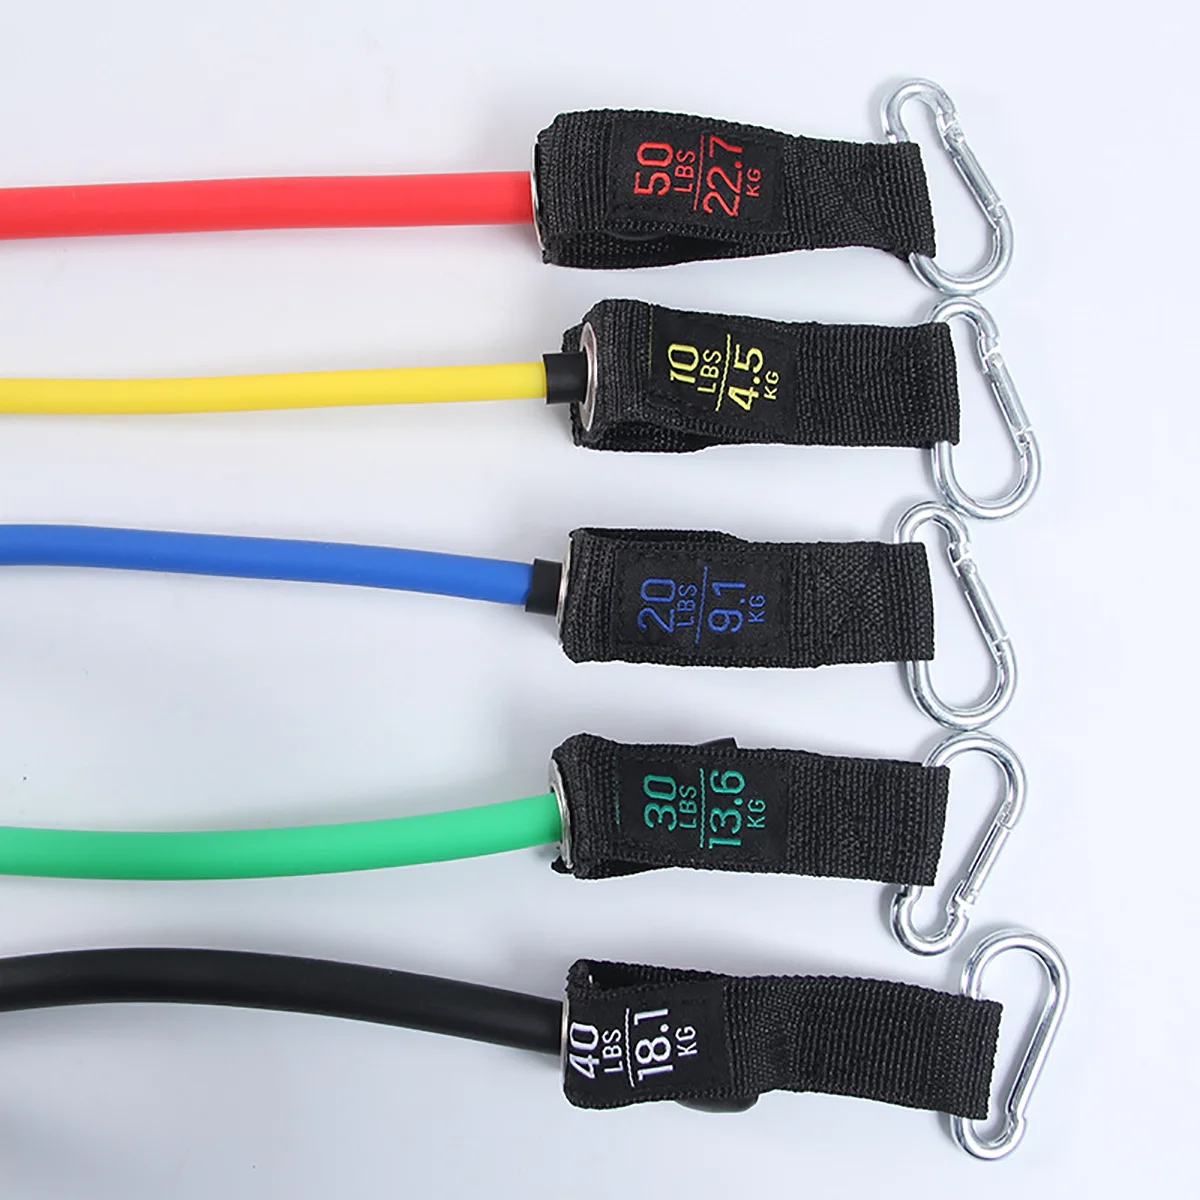 Rubber Pull RopeResistance Bands Fitness for Indoor Stength Training Monarú